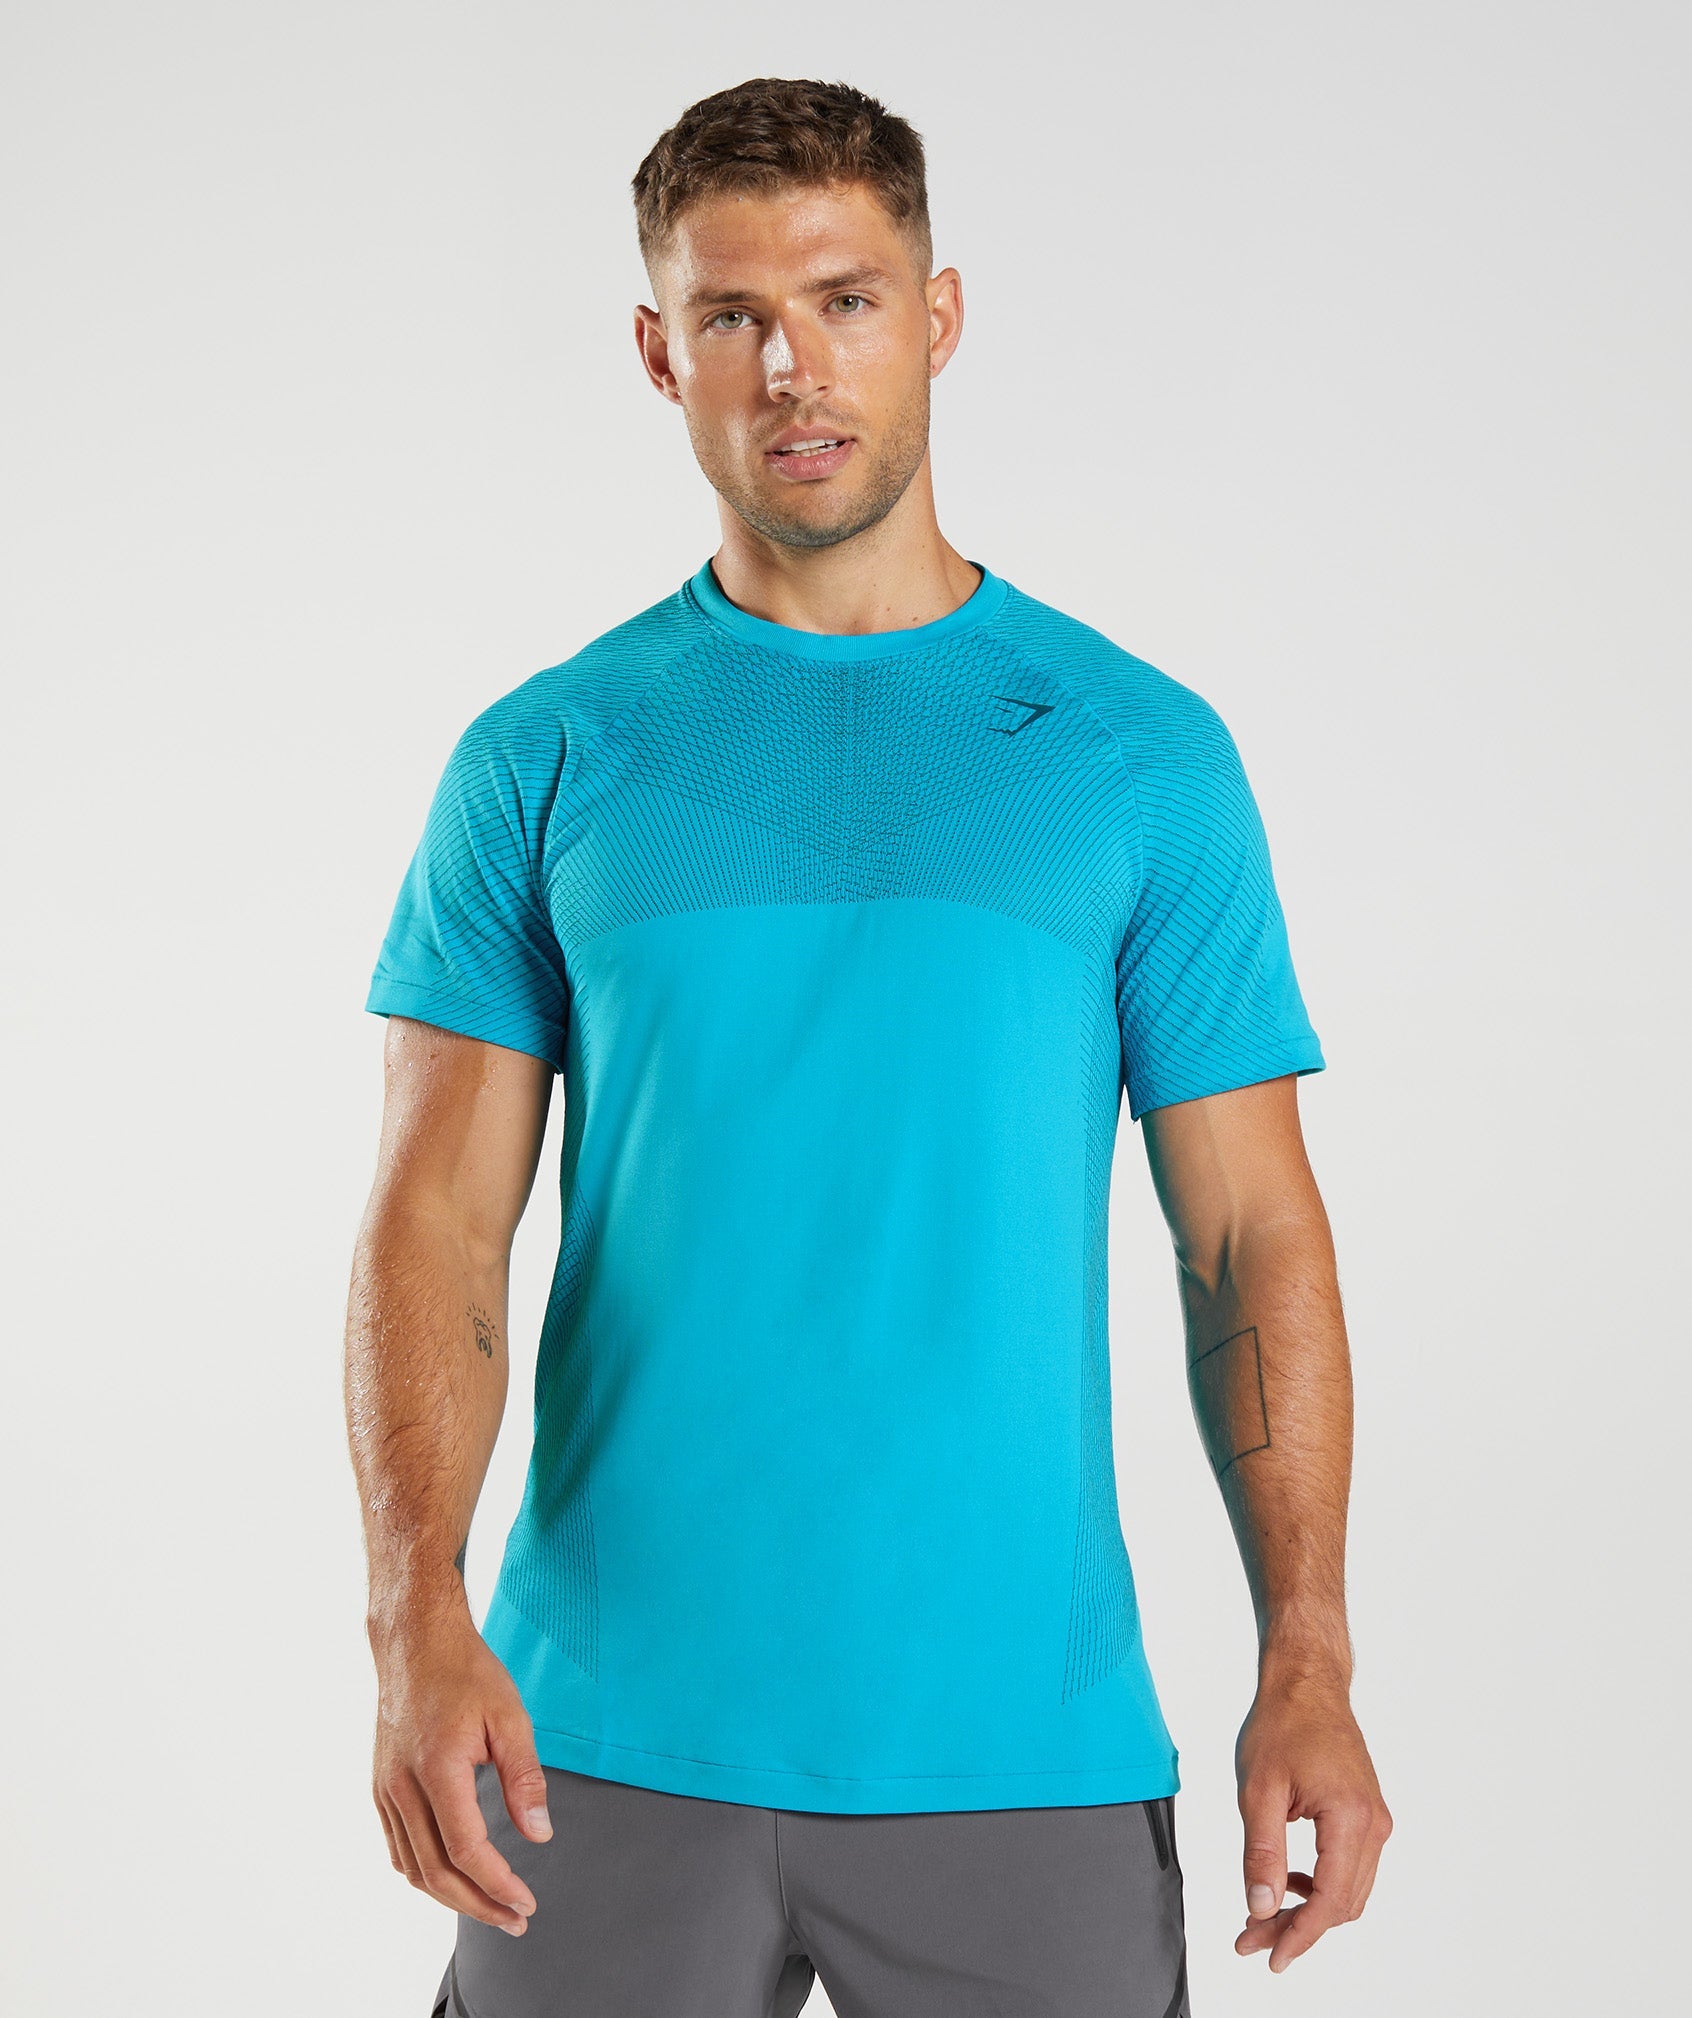 Apex Seamless T-Shirt in Shark Blue/Atlantic Blue is out of stock